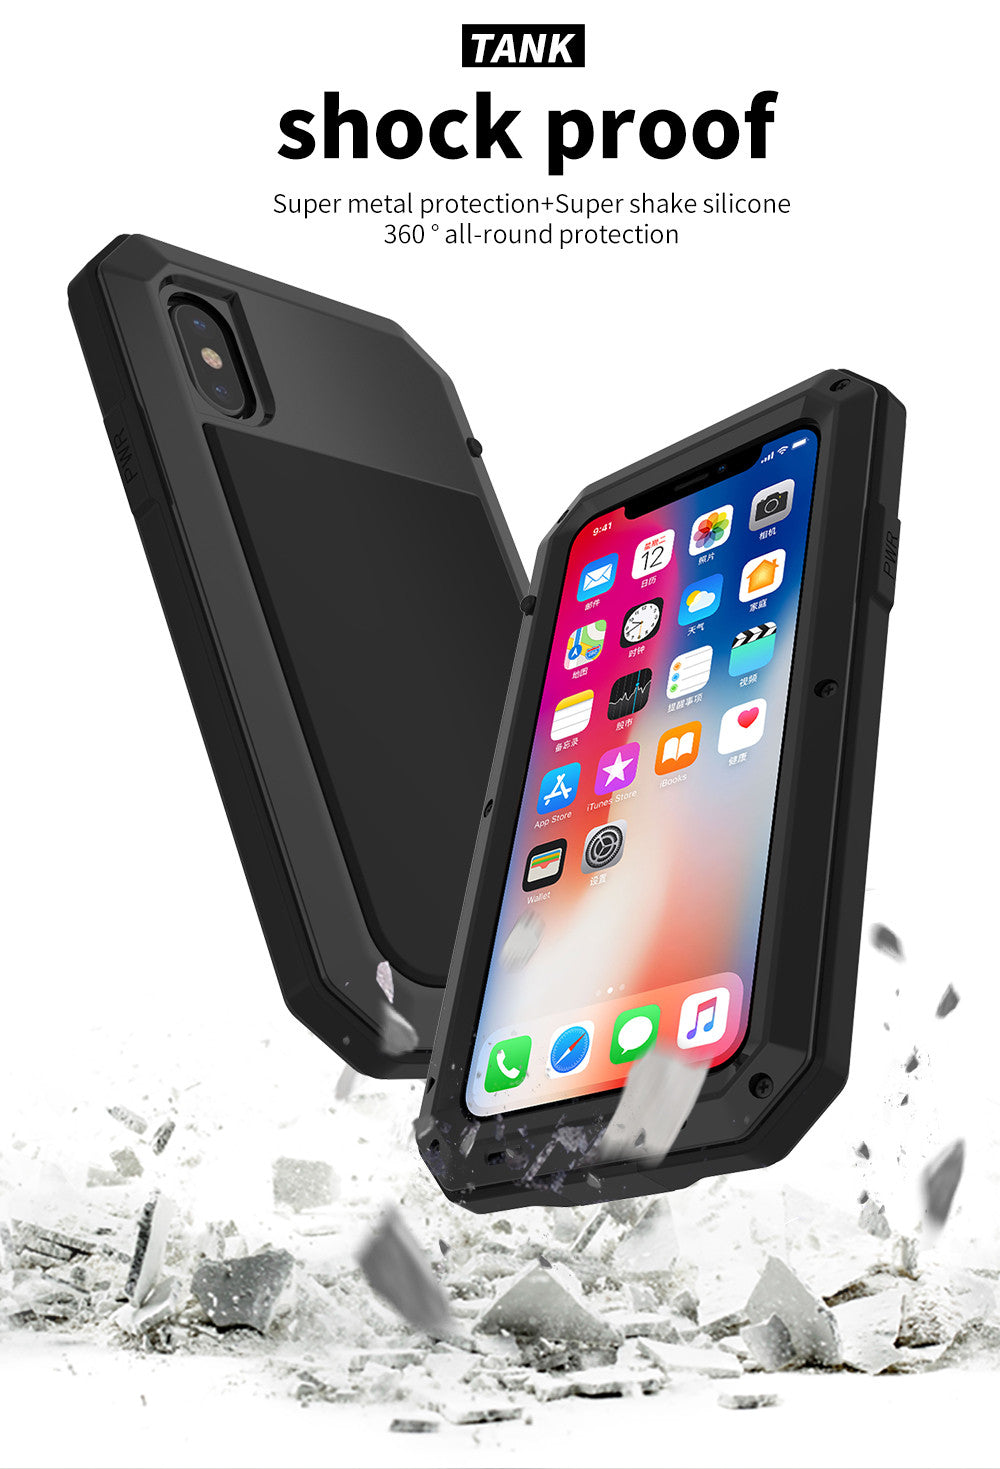 TANK Heavy Duty Protection Armor Metal Phone Case for iPhone Aluminum Shockproof Cover